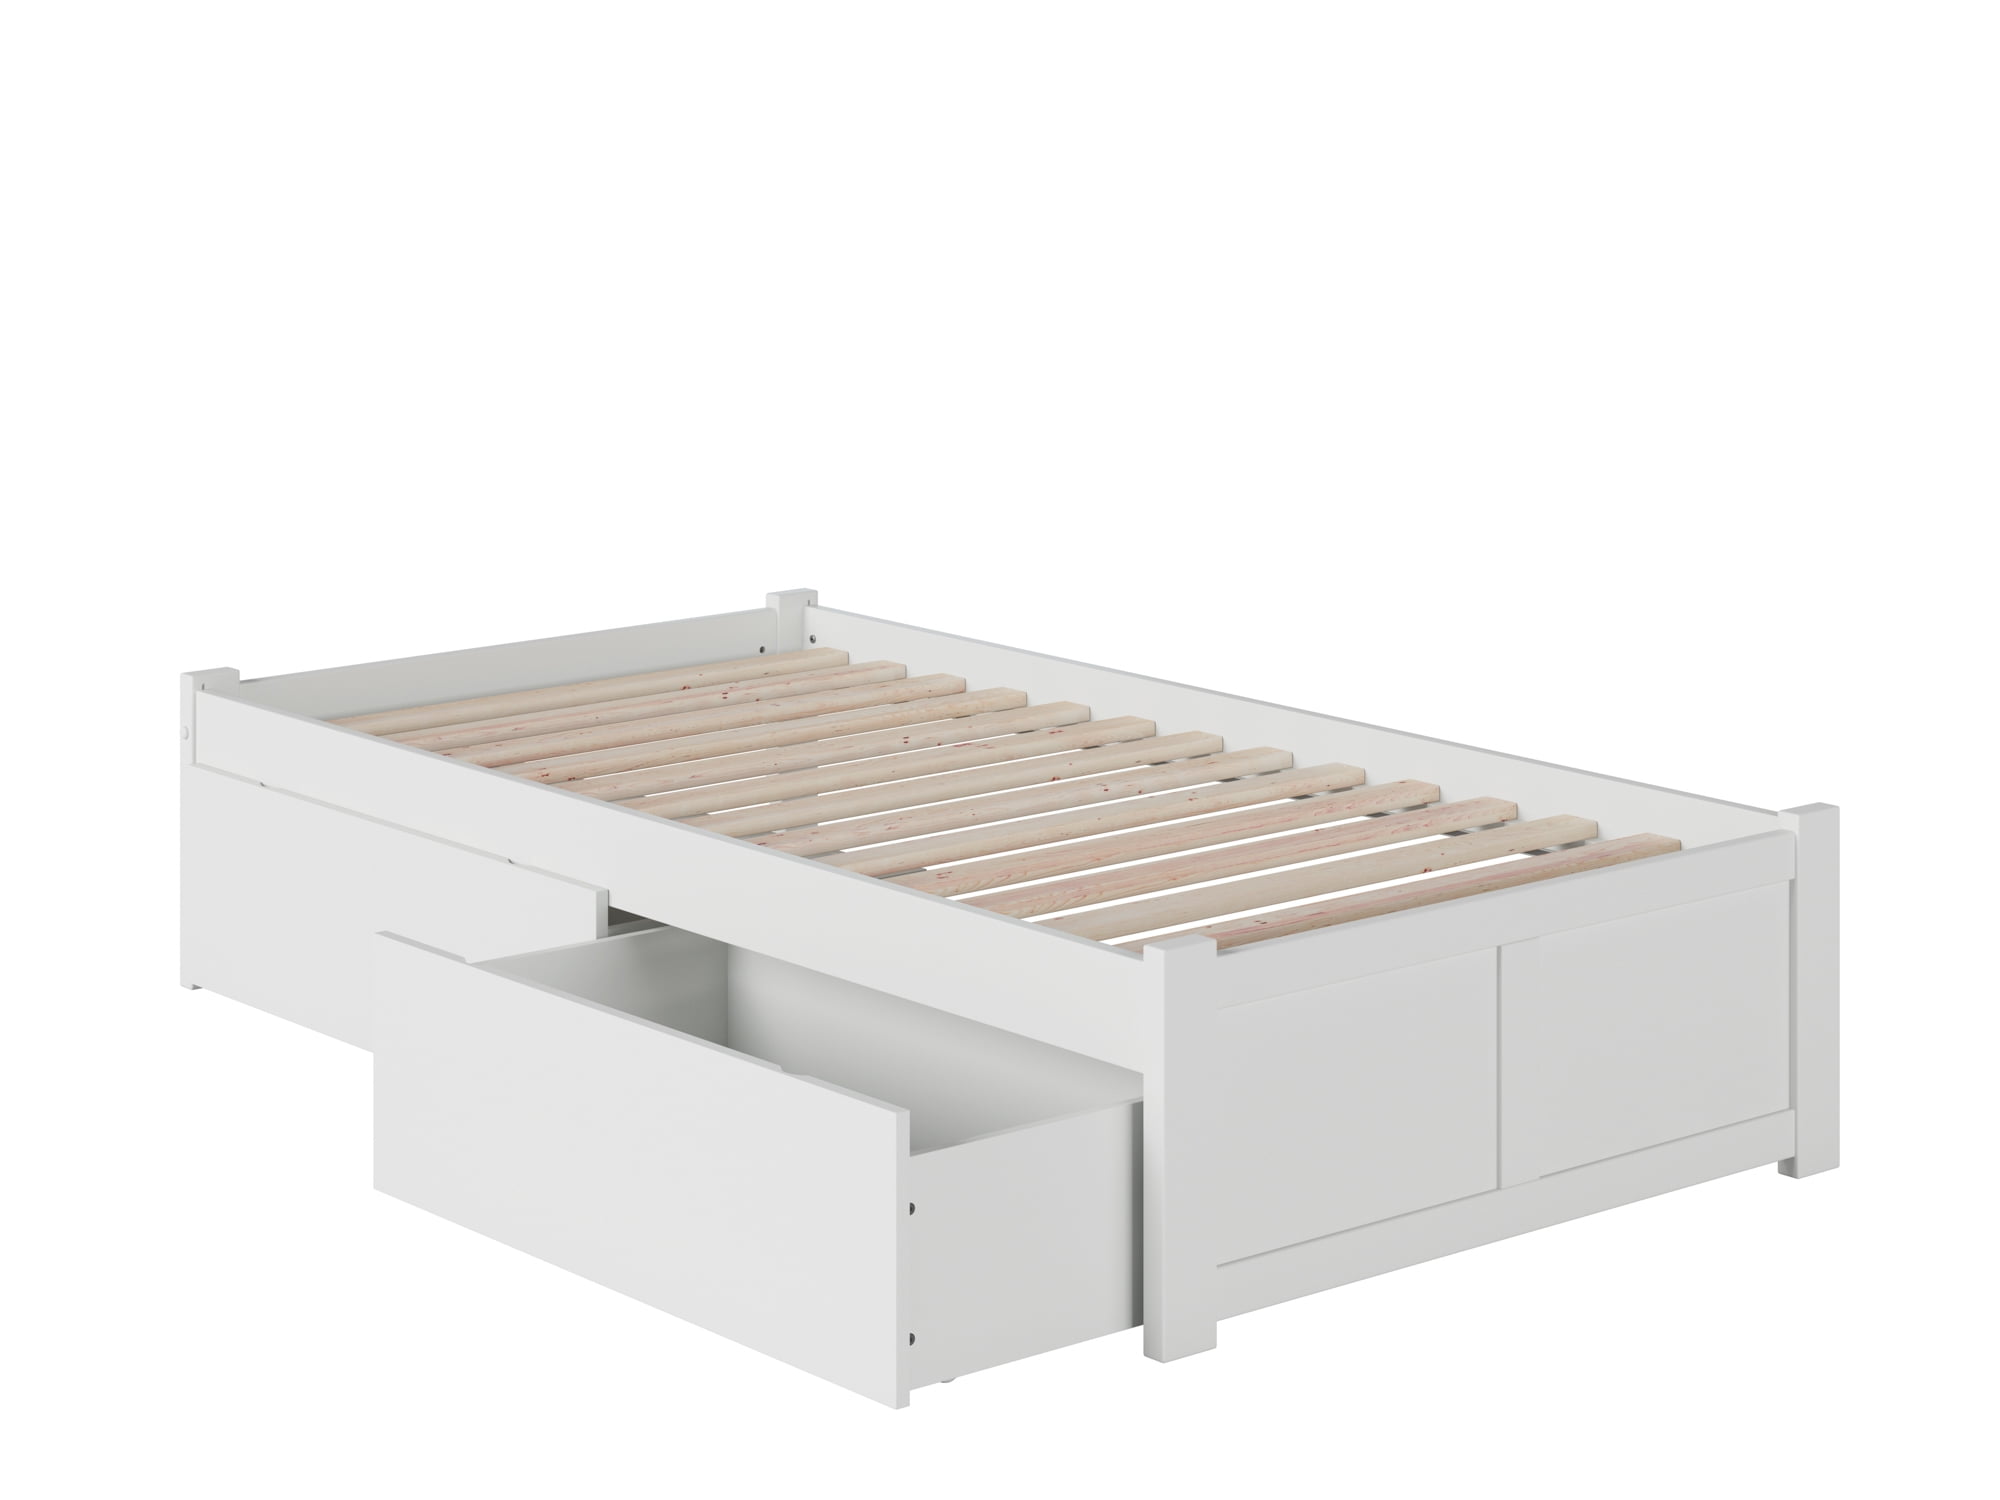 Picture of Atlantic Furniture AR8012112 Concord Flat Panel Foot Board with Urban Bed Drawers, White - Twin Extra Large